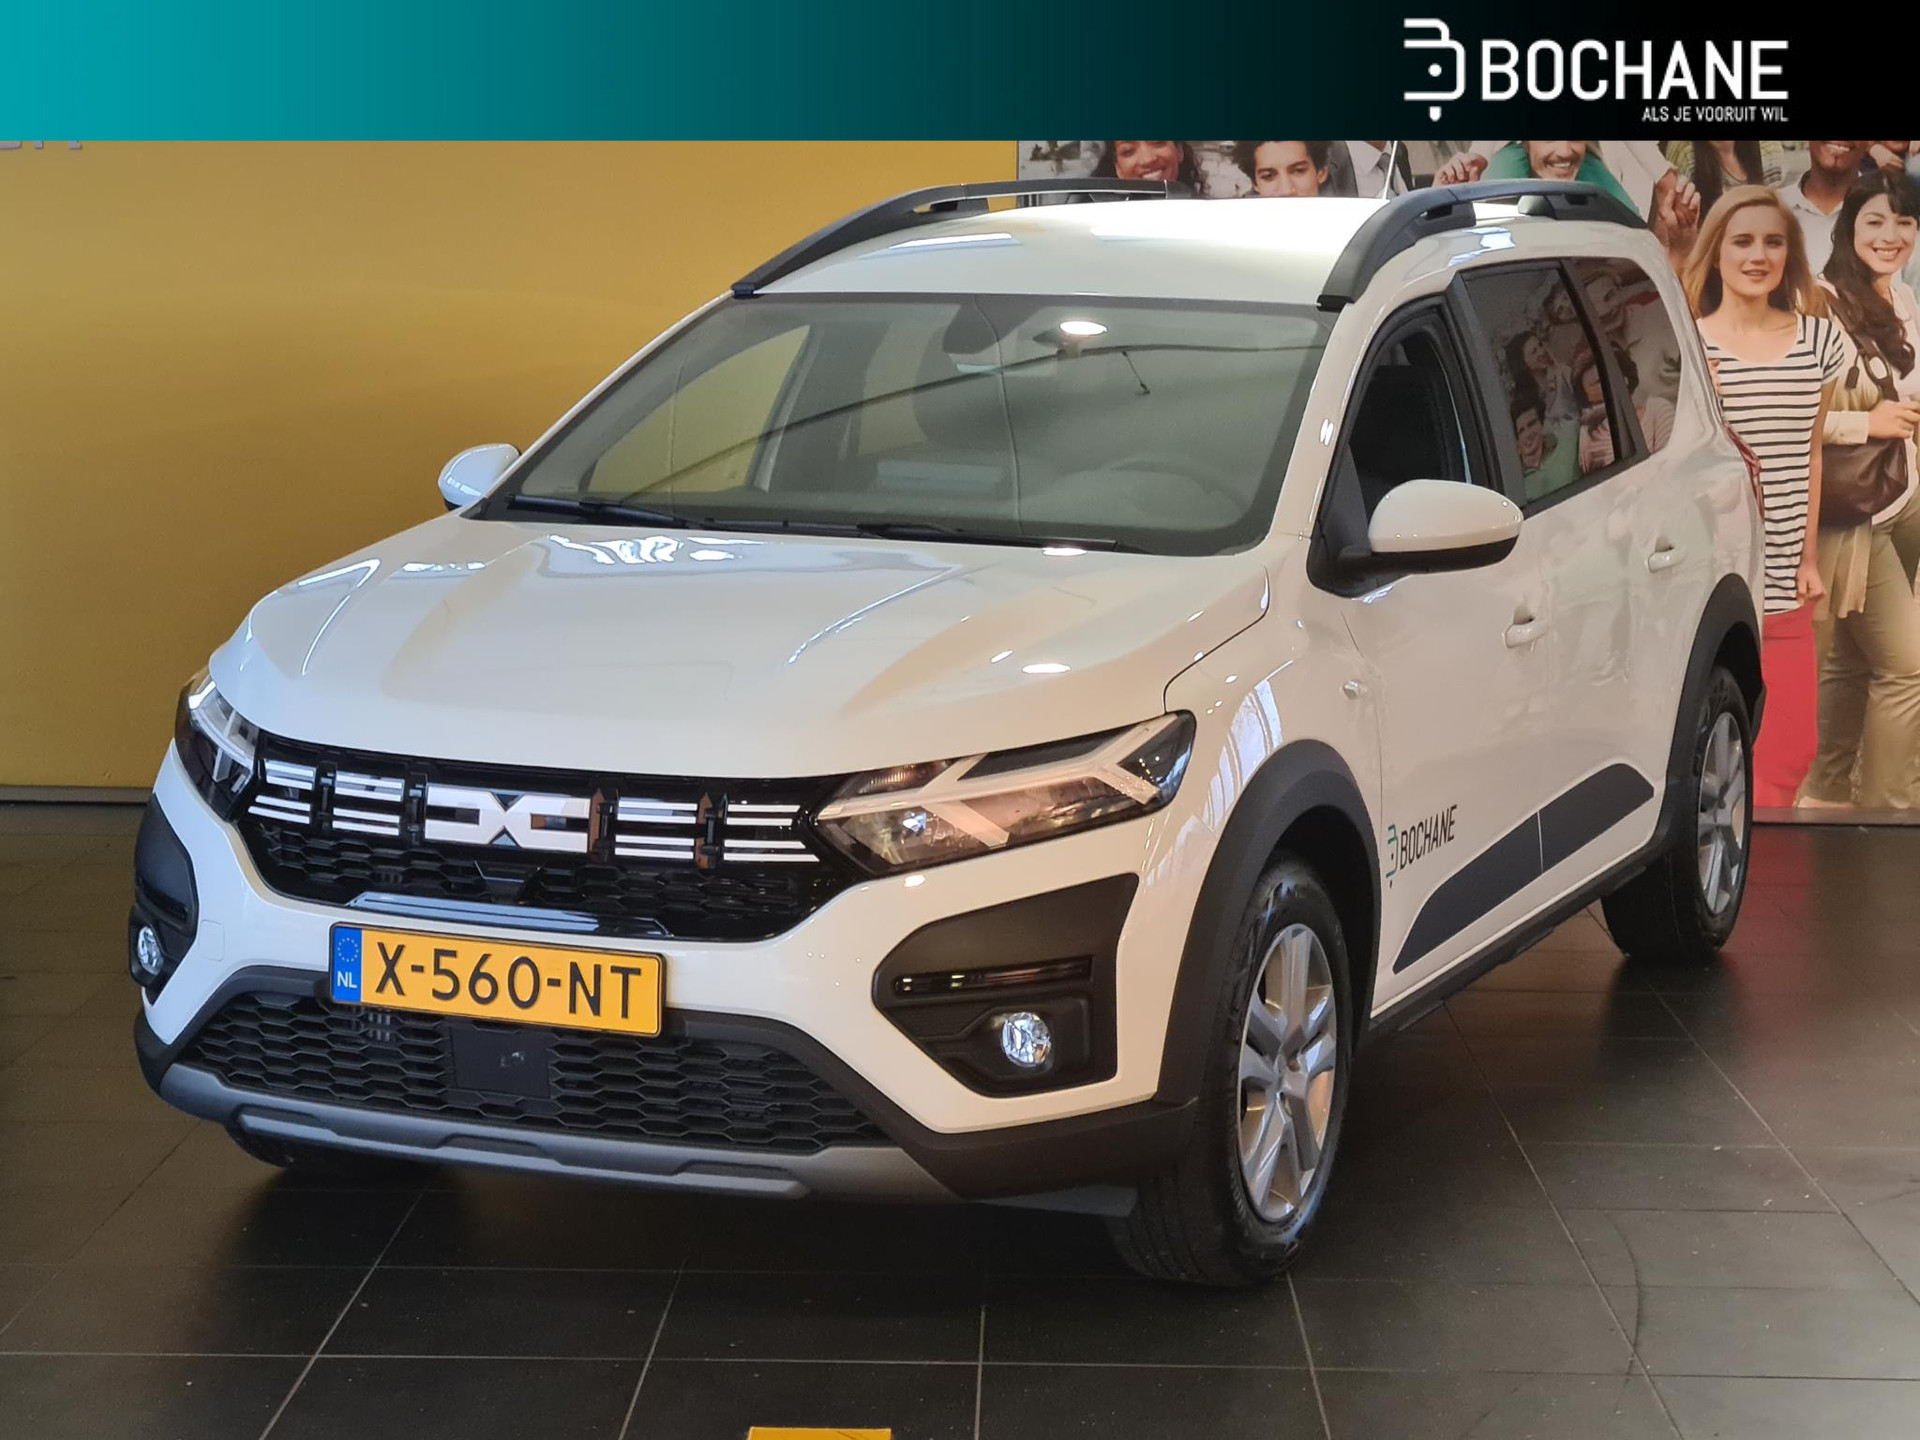 Dacia Jogger 1.0 TCe 110 Expression 7p. | PARKEERSENSOREN ACHTER | ANDROID AUTO & APPLE CARPLAY | CRUISE CONTROL | AIRCO | bij viaBOVAG.nl